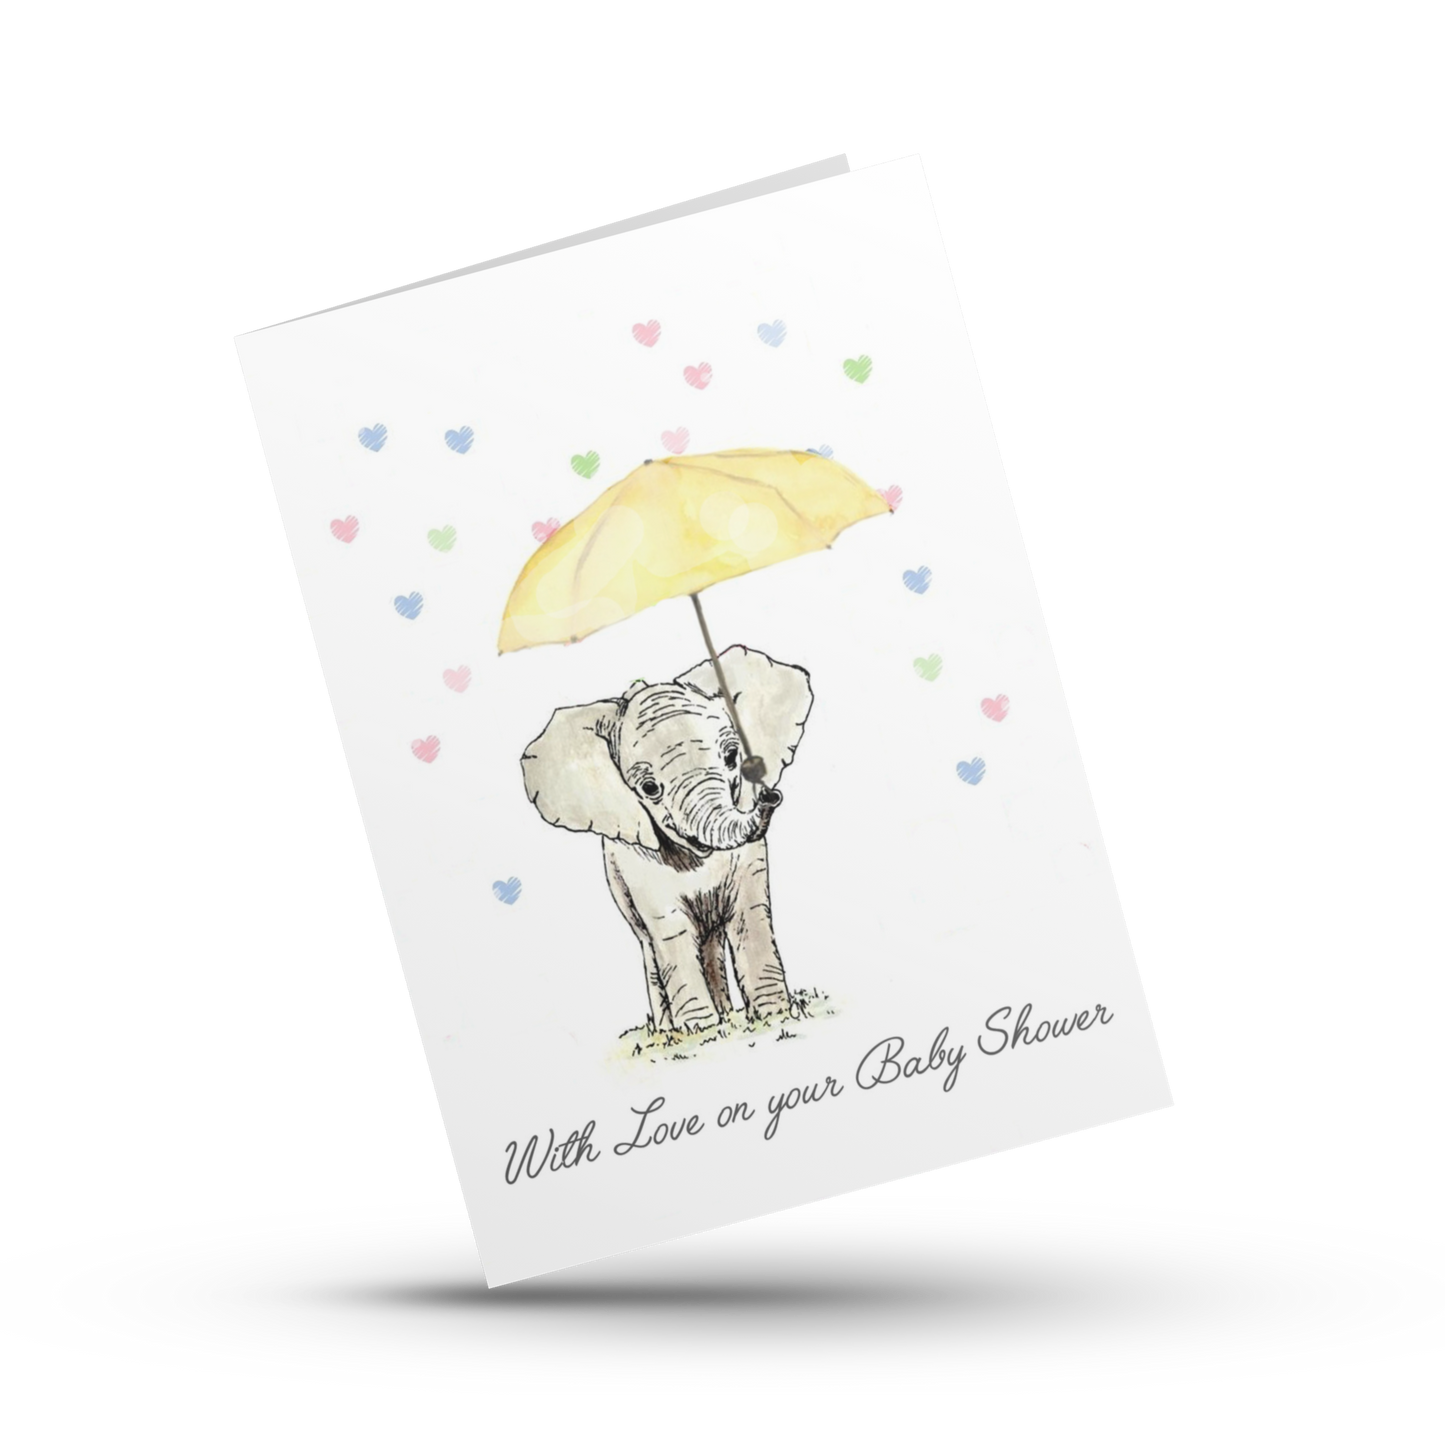 With love on your baby shower, Baby shower card, Neutral baby card, Baby elephant card, New baby congrats card, Welcome baby, Expecting card